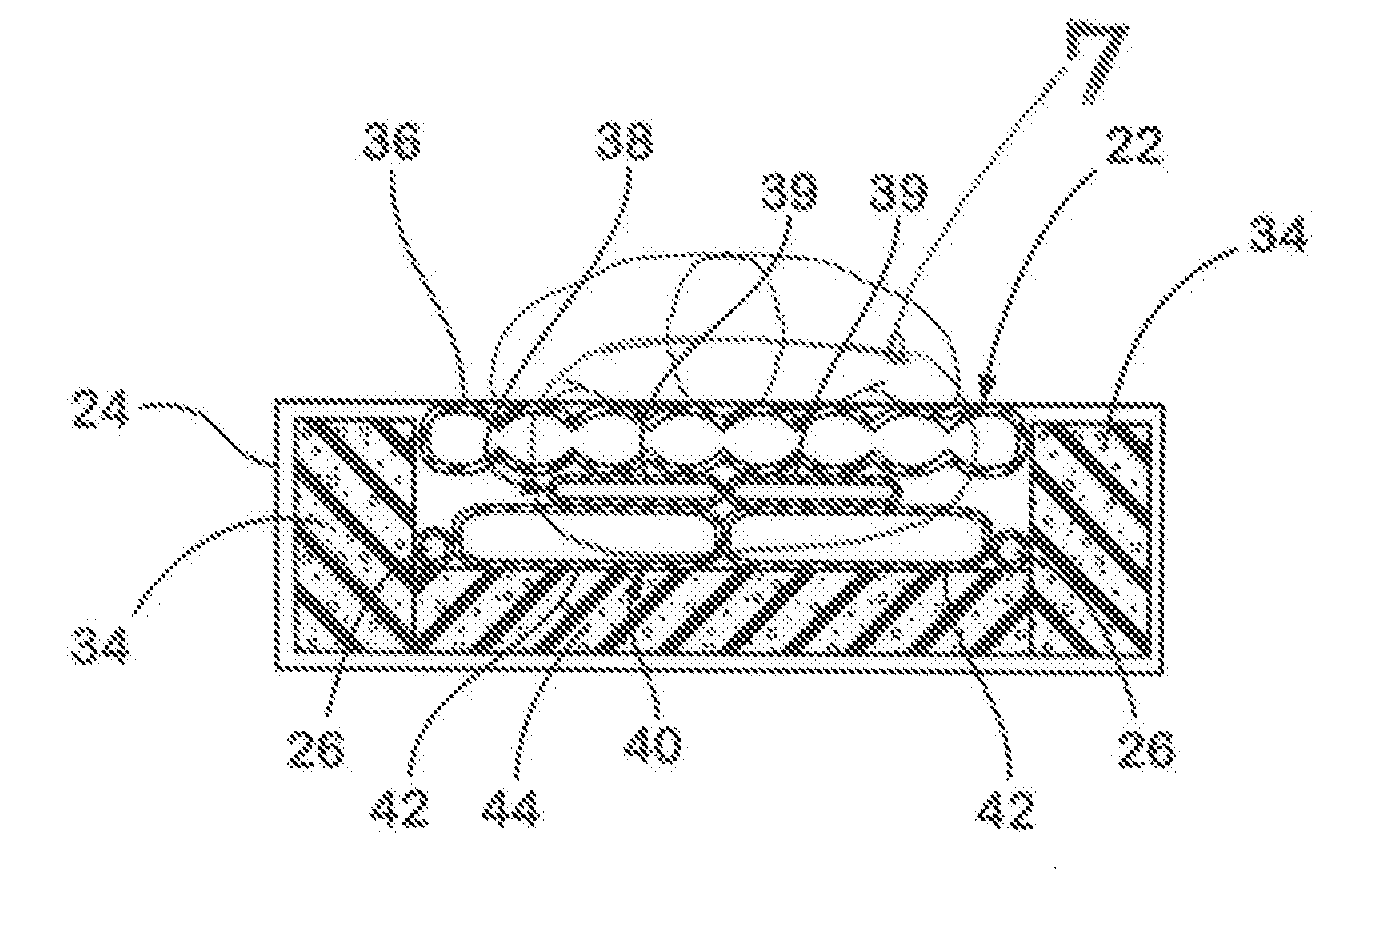 Vibrating patient support apparatus with a resonant referencing percussion device